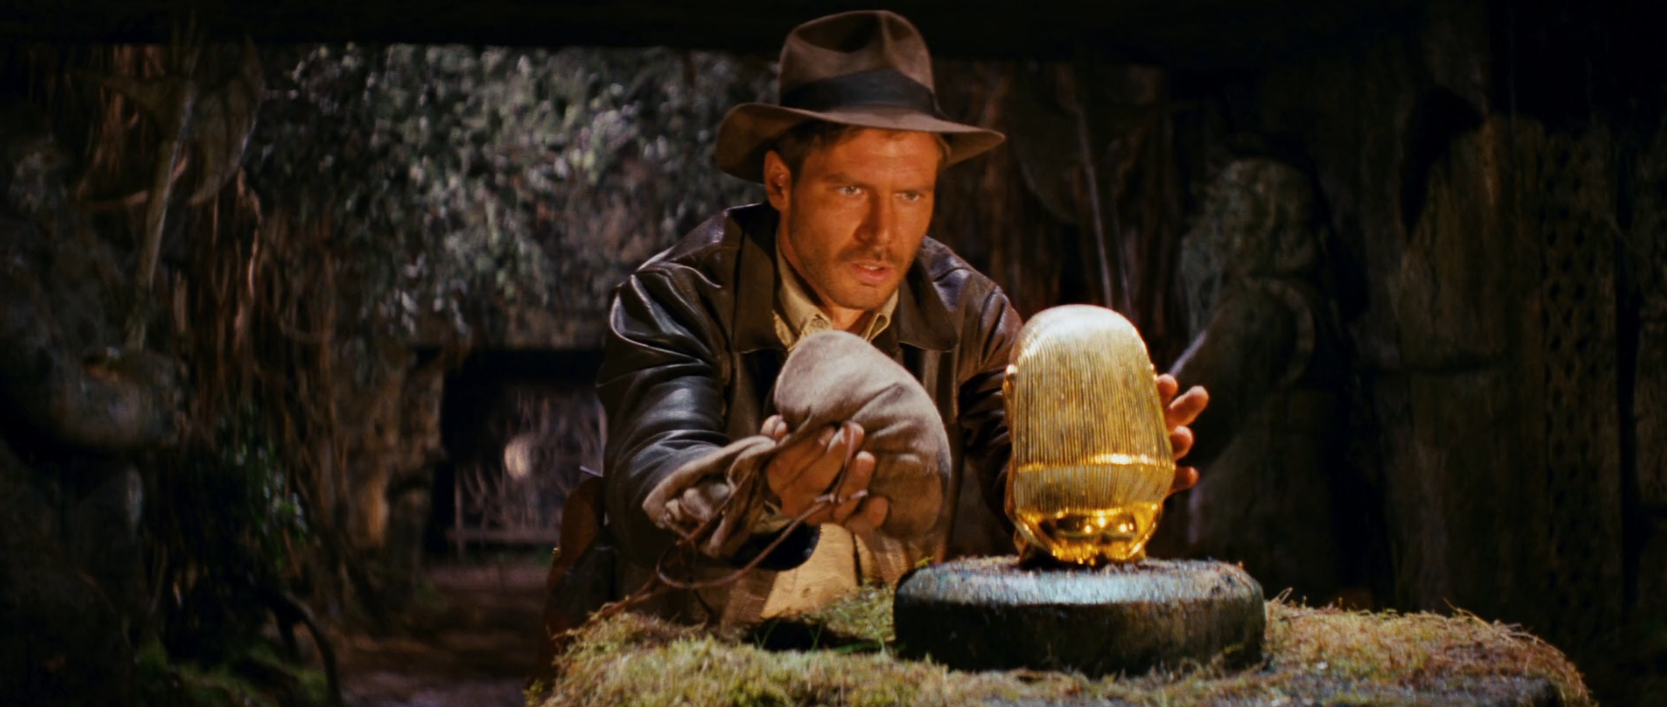 Indiana Jones and the Raiders of the Lost Ark - Golden idol on a pedestal